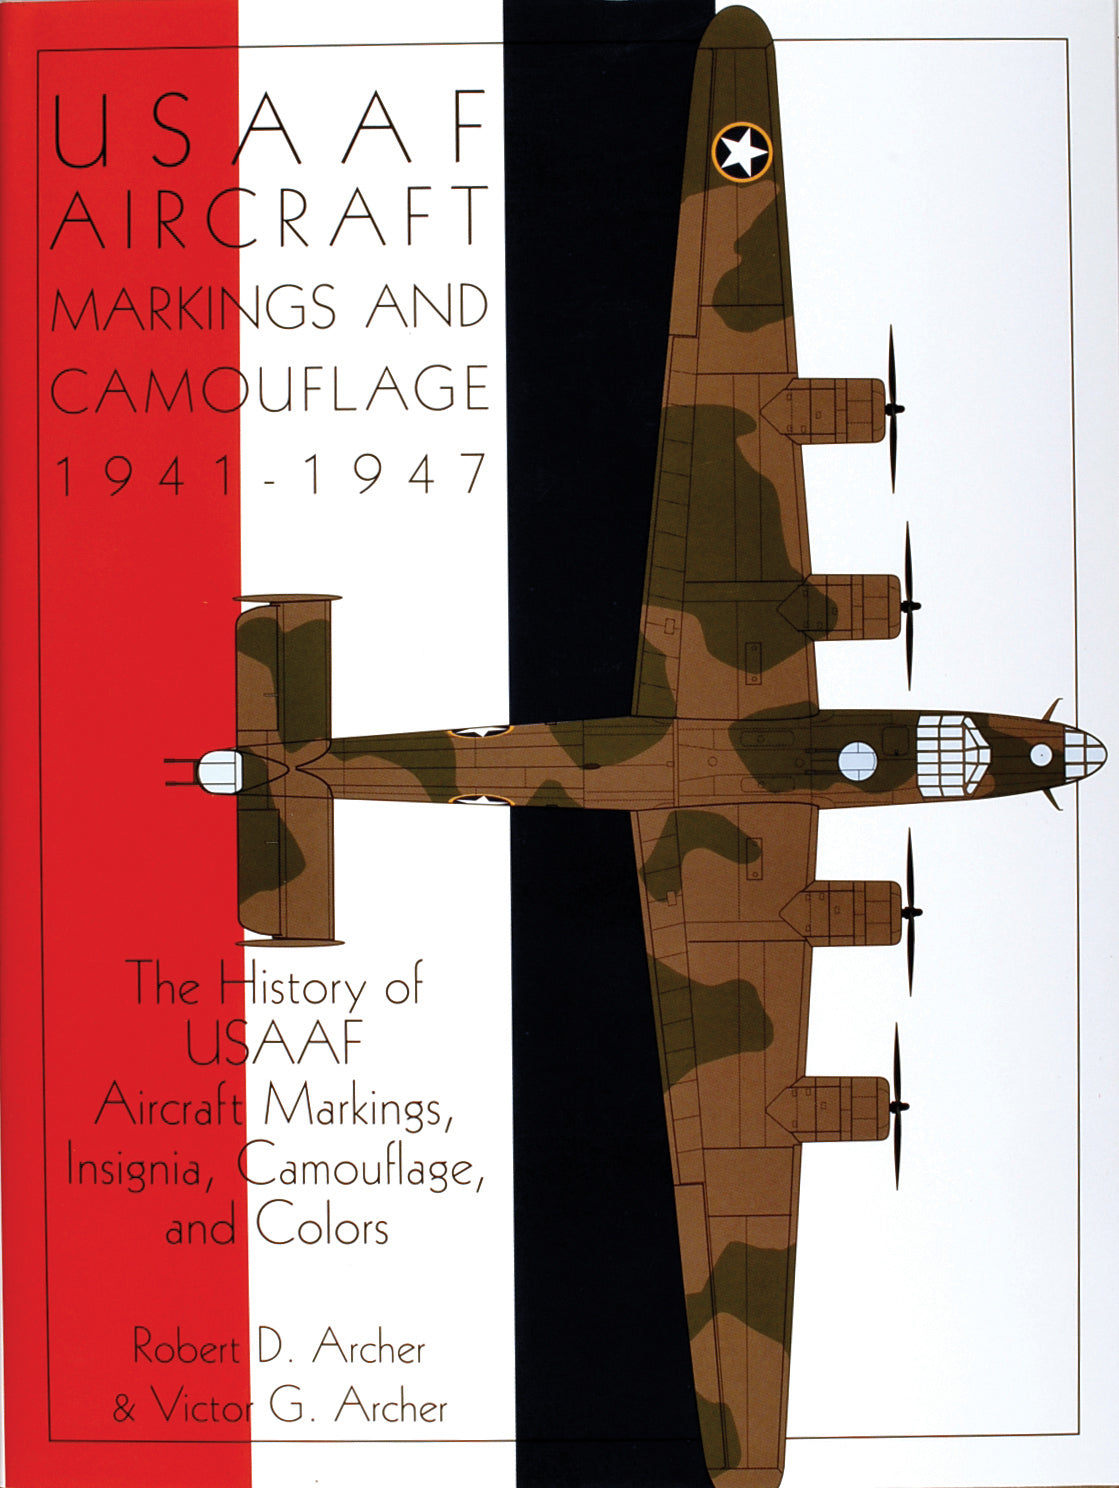 USAAF Aircraft Markings and Camouflage 1941-1947